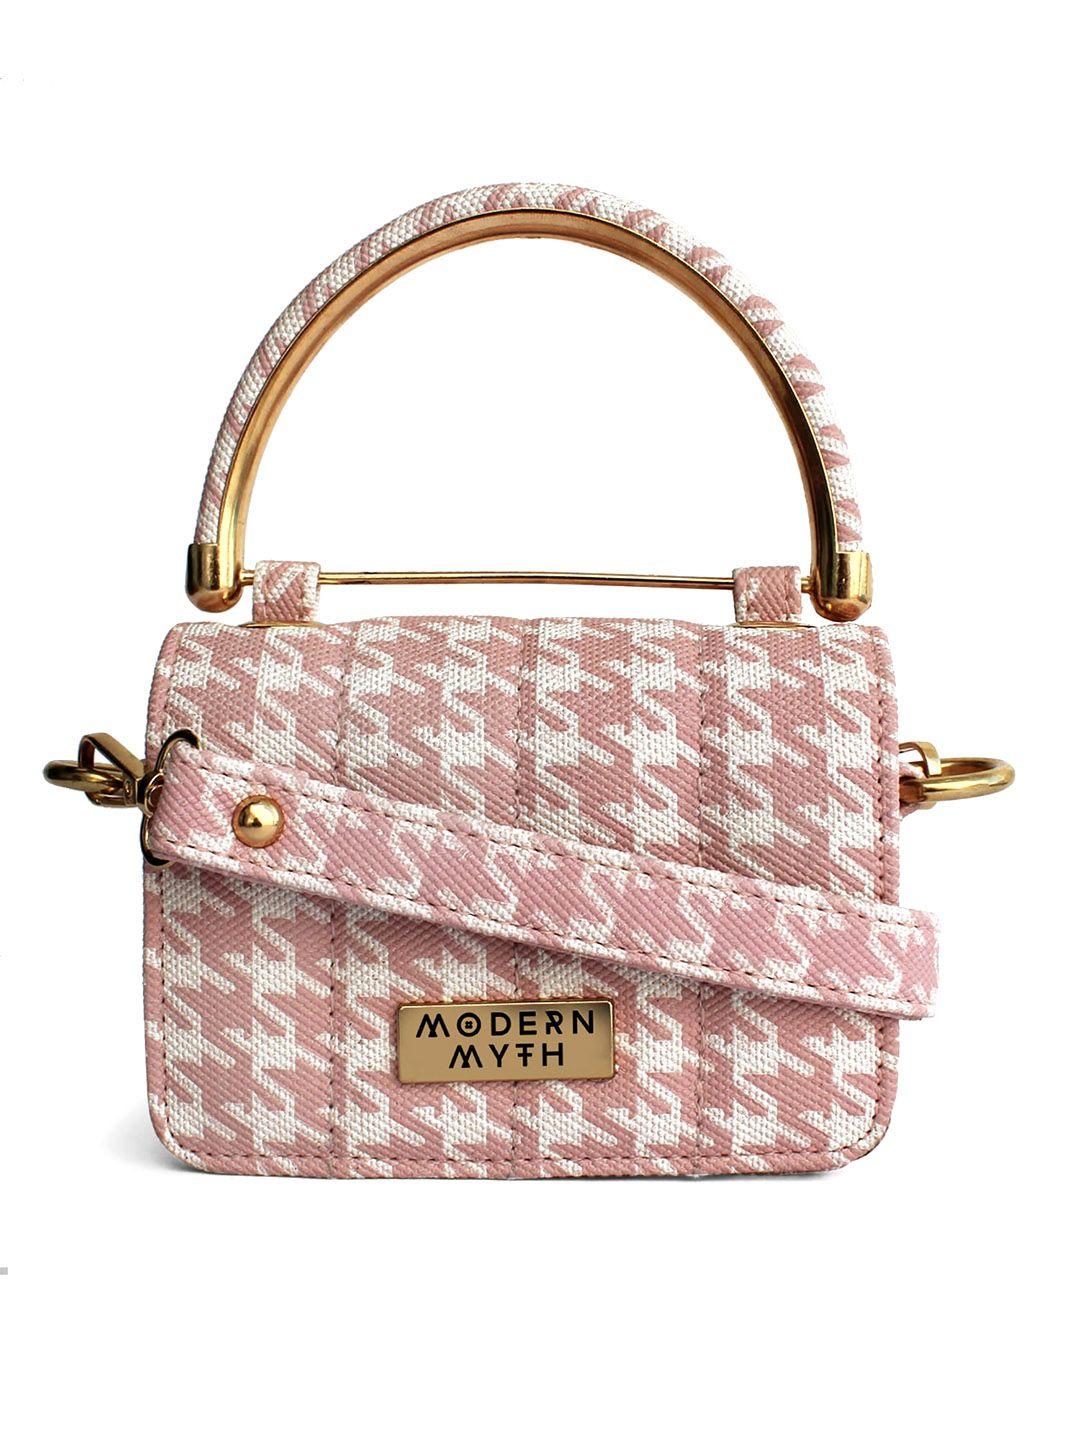 modern myth pink textured structured shoulder bag with quilted